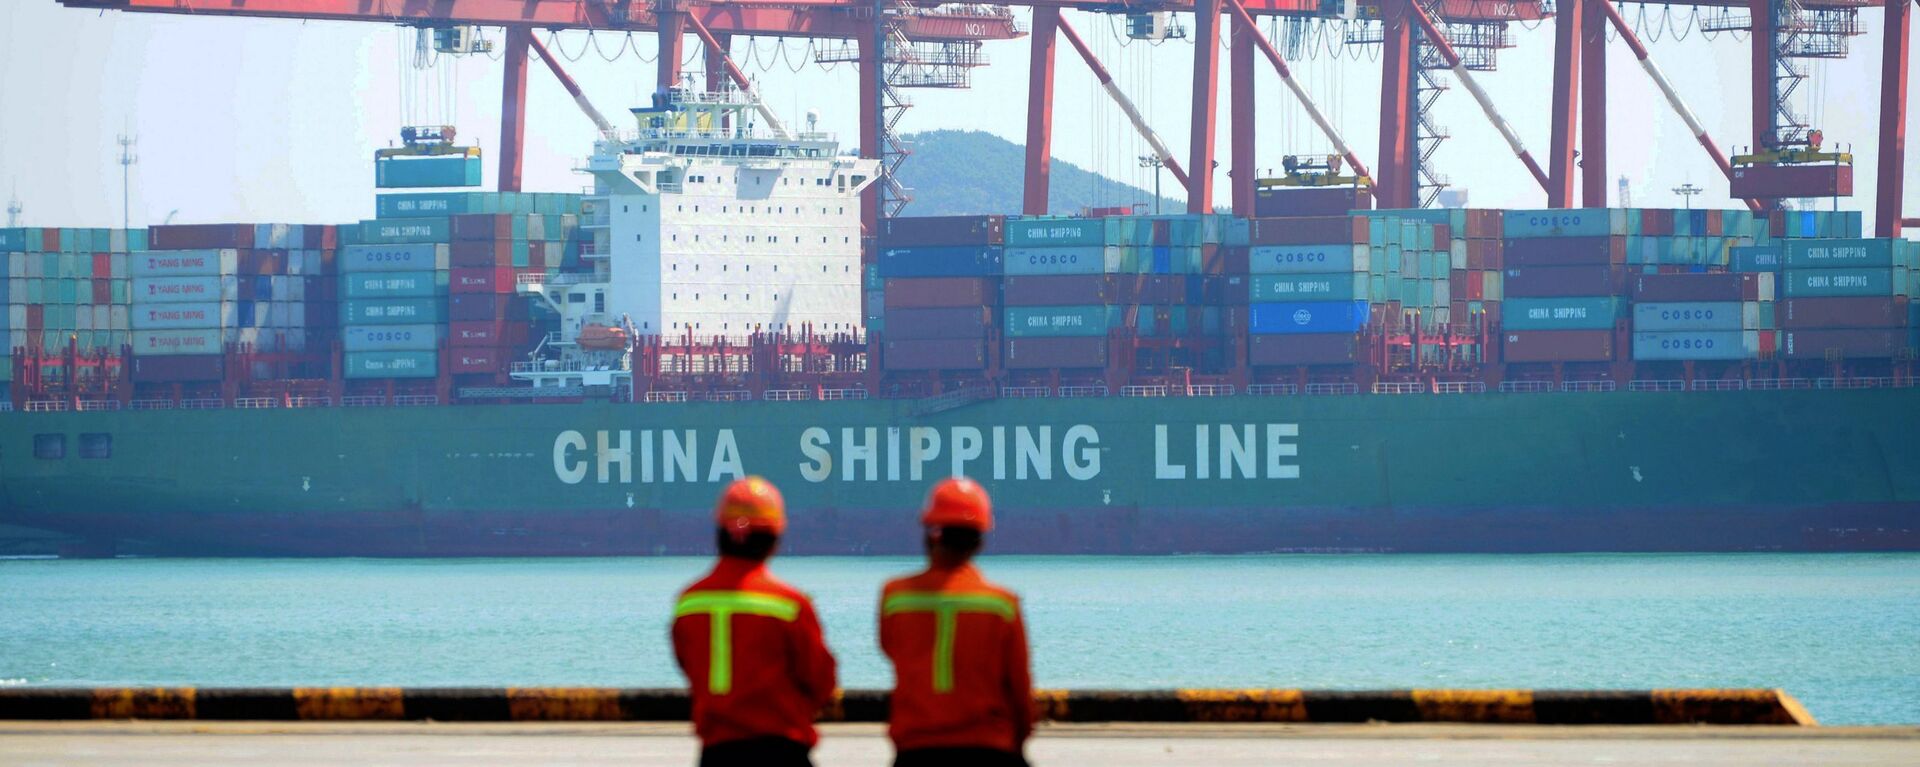 Chinese workers stand on a pier before a cargo ship at a port in Qingdao, east China's Shandong province on 13 April 2017 - Sputnik International, 1920, 23.02.2021